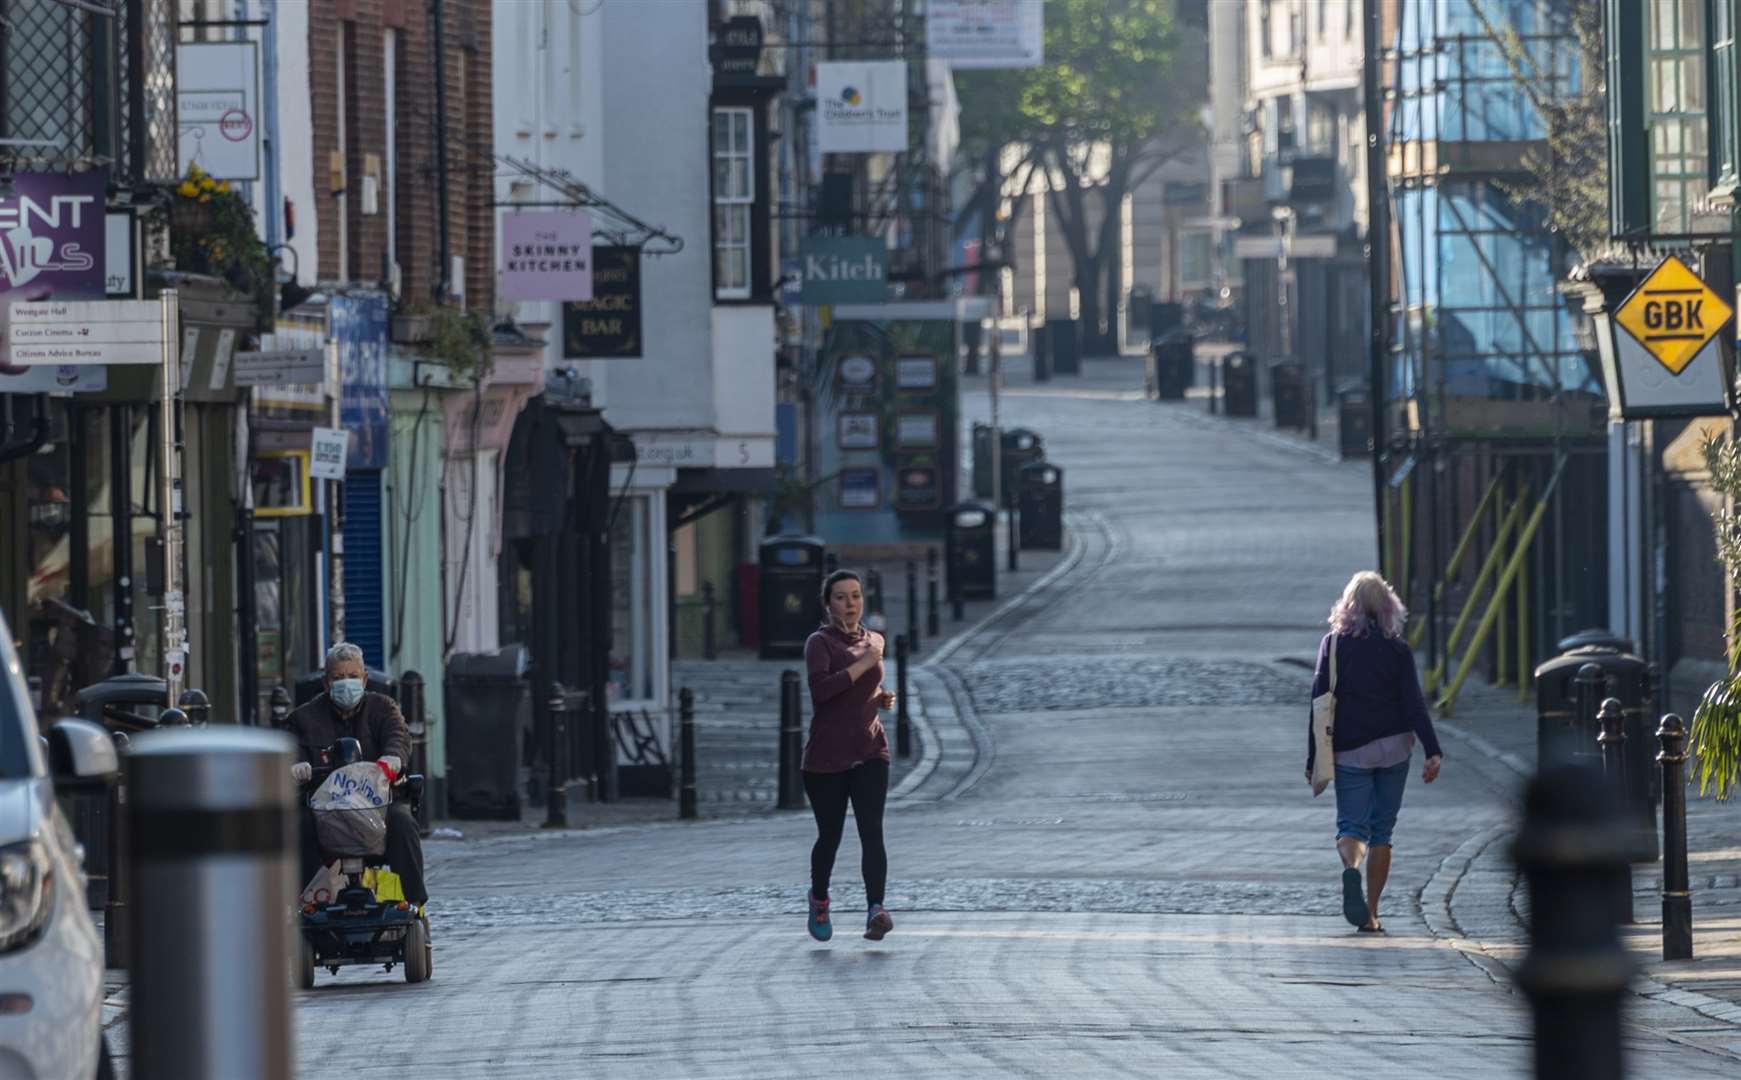 Non-essential shops, like those in Canterbury High Street, will be forced to close. Picture: Jo Court